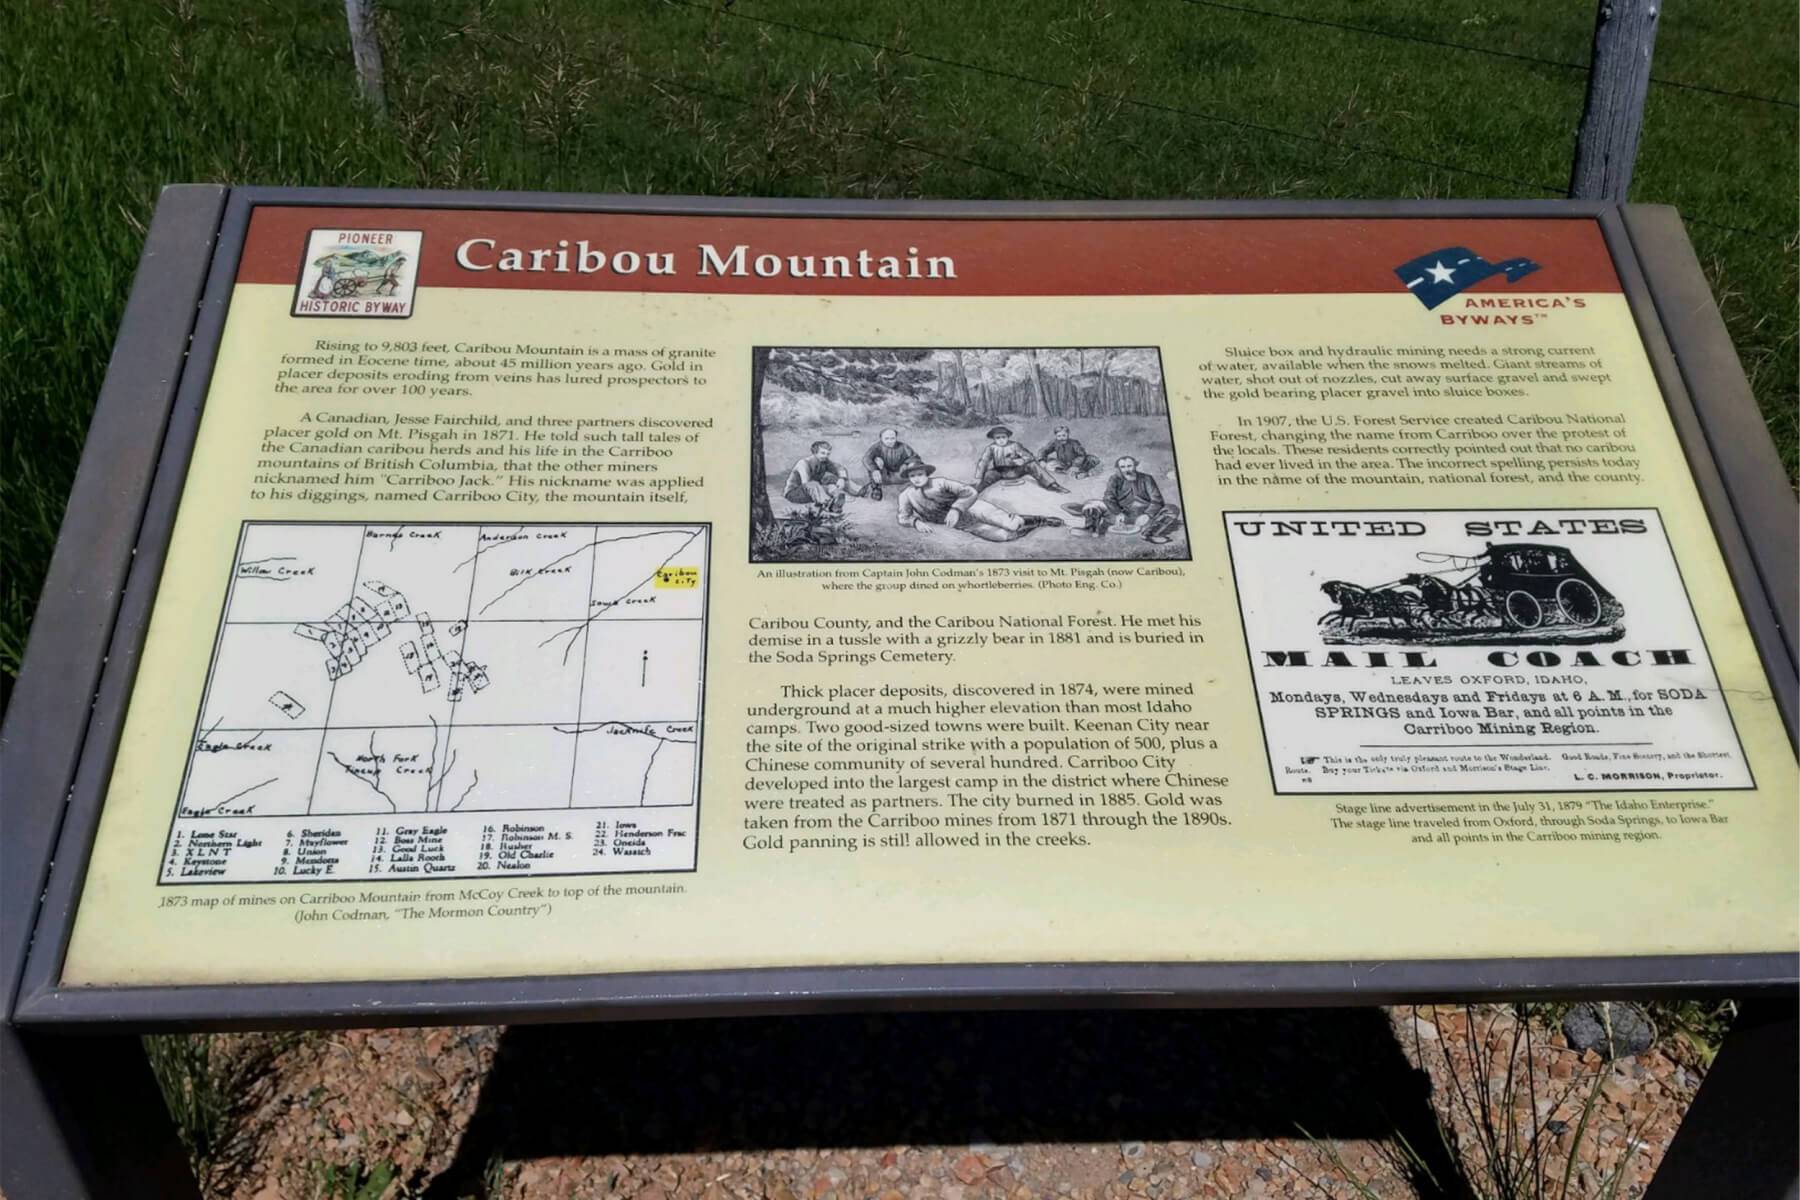 a sign depicting information about Caribou Mountain, including a map and historical illustrations